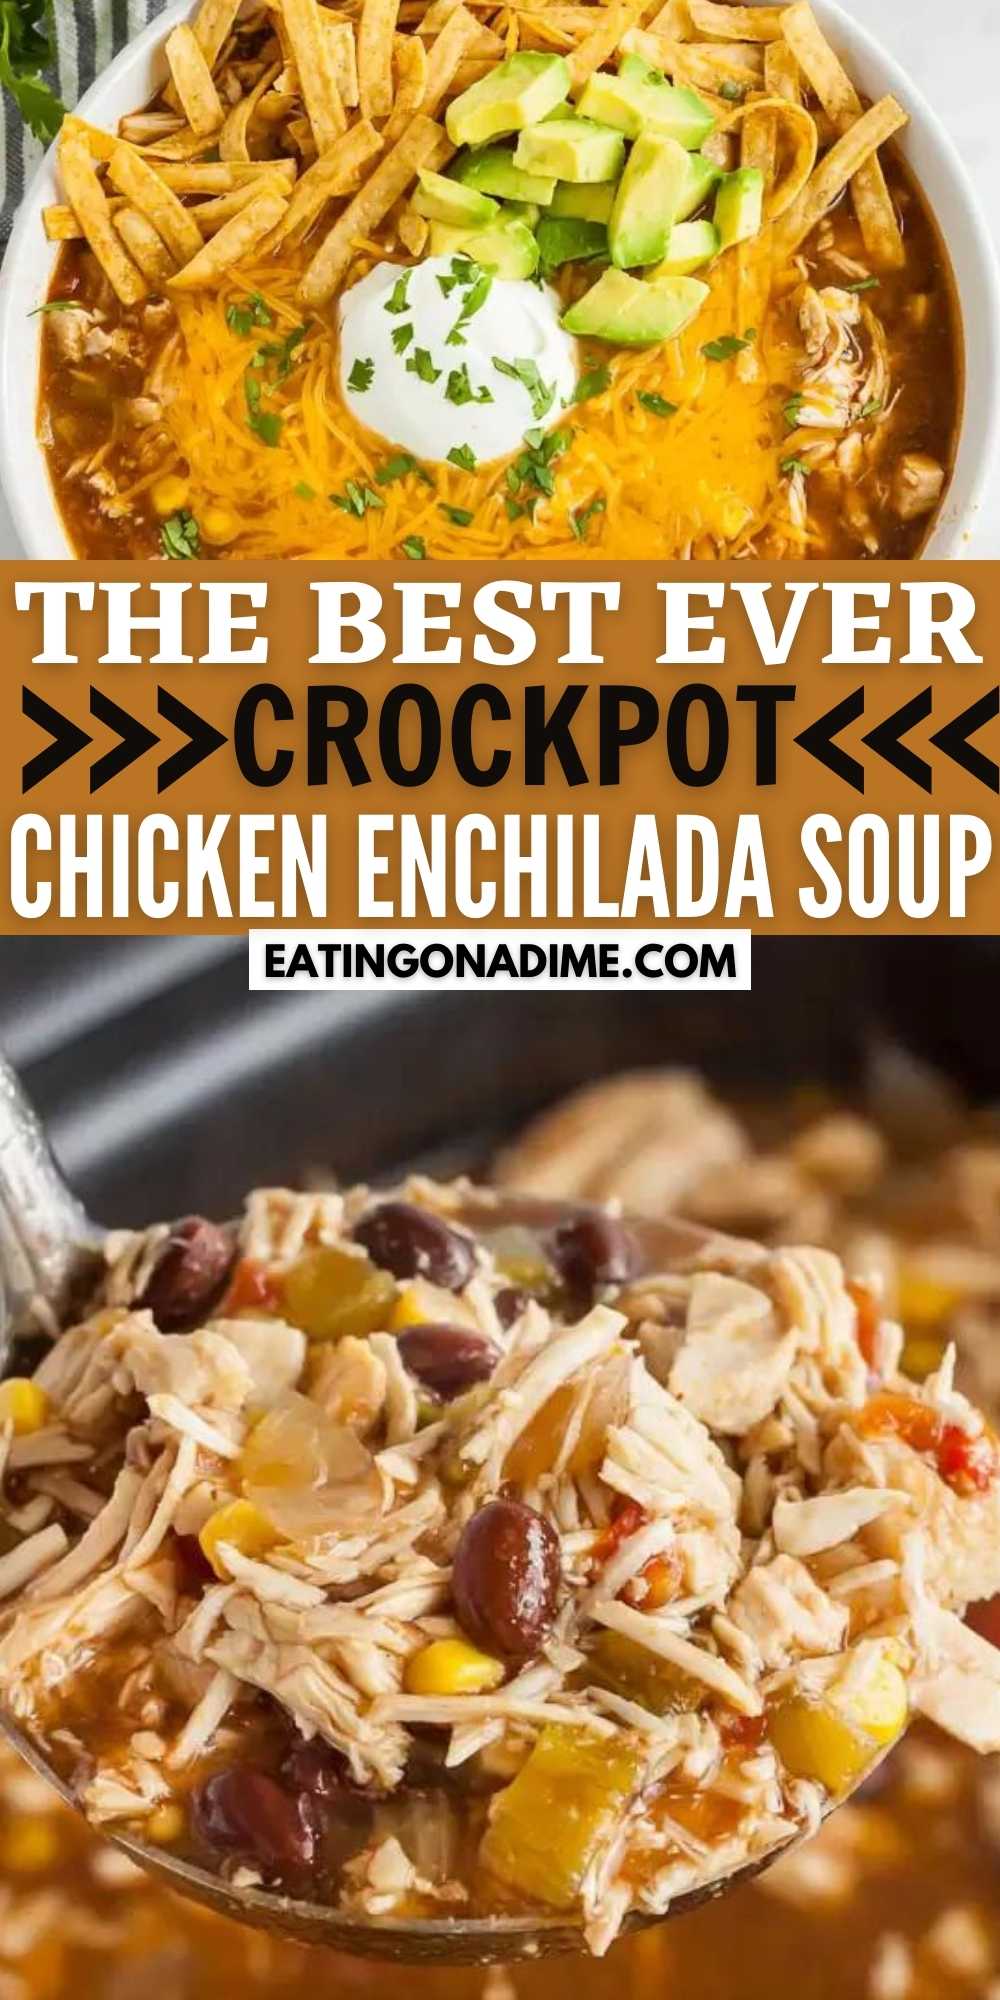 Crockpot Chicken Enchilada Soup Recipe is one of my favorite go-to soup recipes for busy weeknights that is healthy too. This soup has everything you need for a great dinner and it’s easy to make too.  Everyone loves this Mexican Slow Cooker soup recipe. #eatingonadime #souprecipes #crockpotrecipes #slowcookerrecipes #mexicanrecipes 
